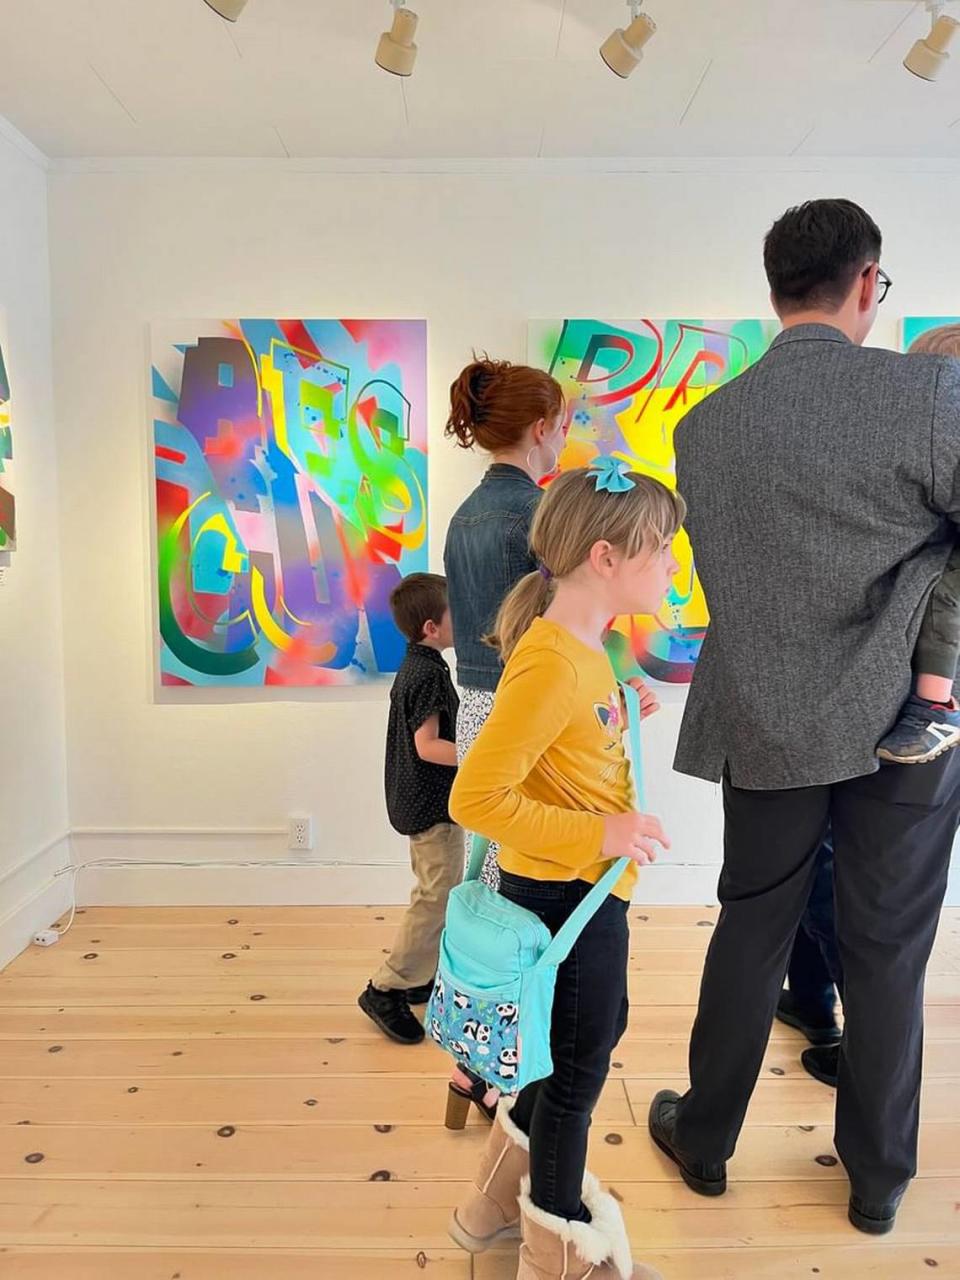 A family peruses the work of Tacoma artist Jared Michael Haviland in the Madsen Gallery in Los Altos, California.